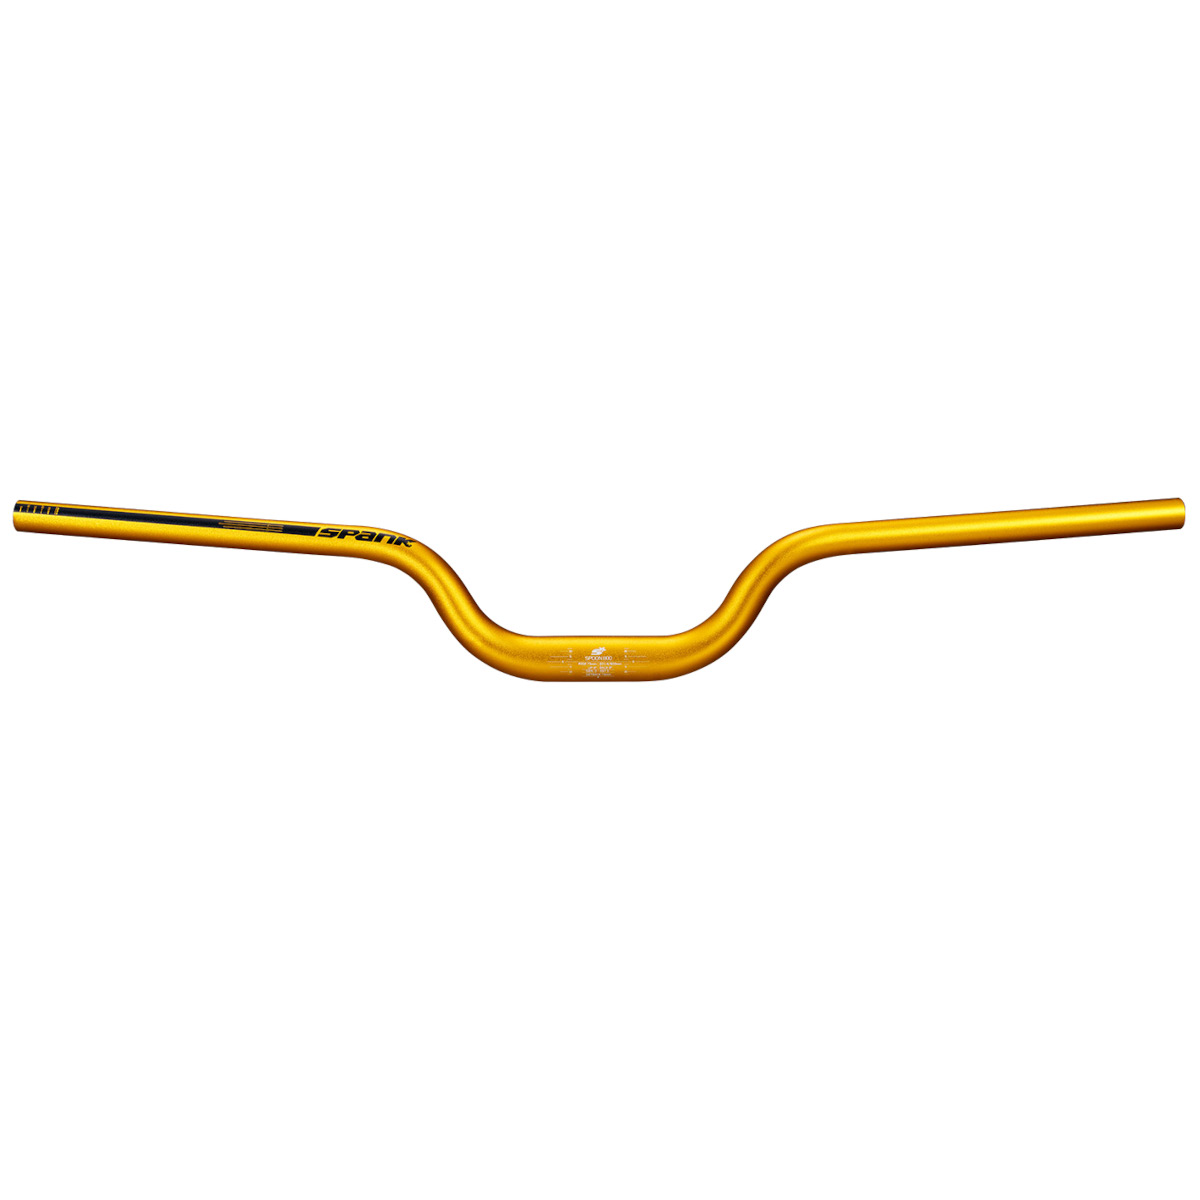 Picture of Spank Spoon 800 MTB Handlebar - gold